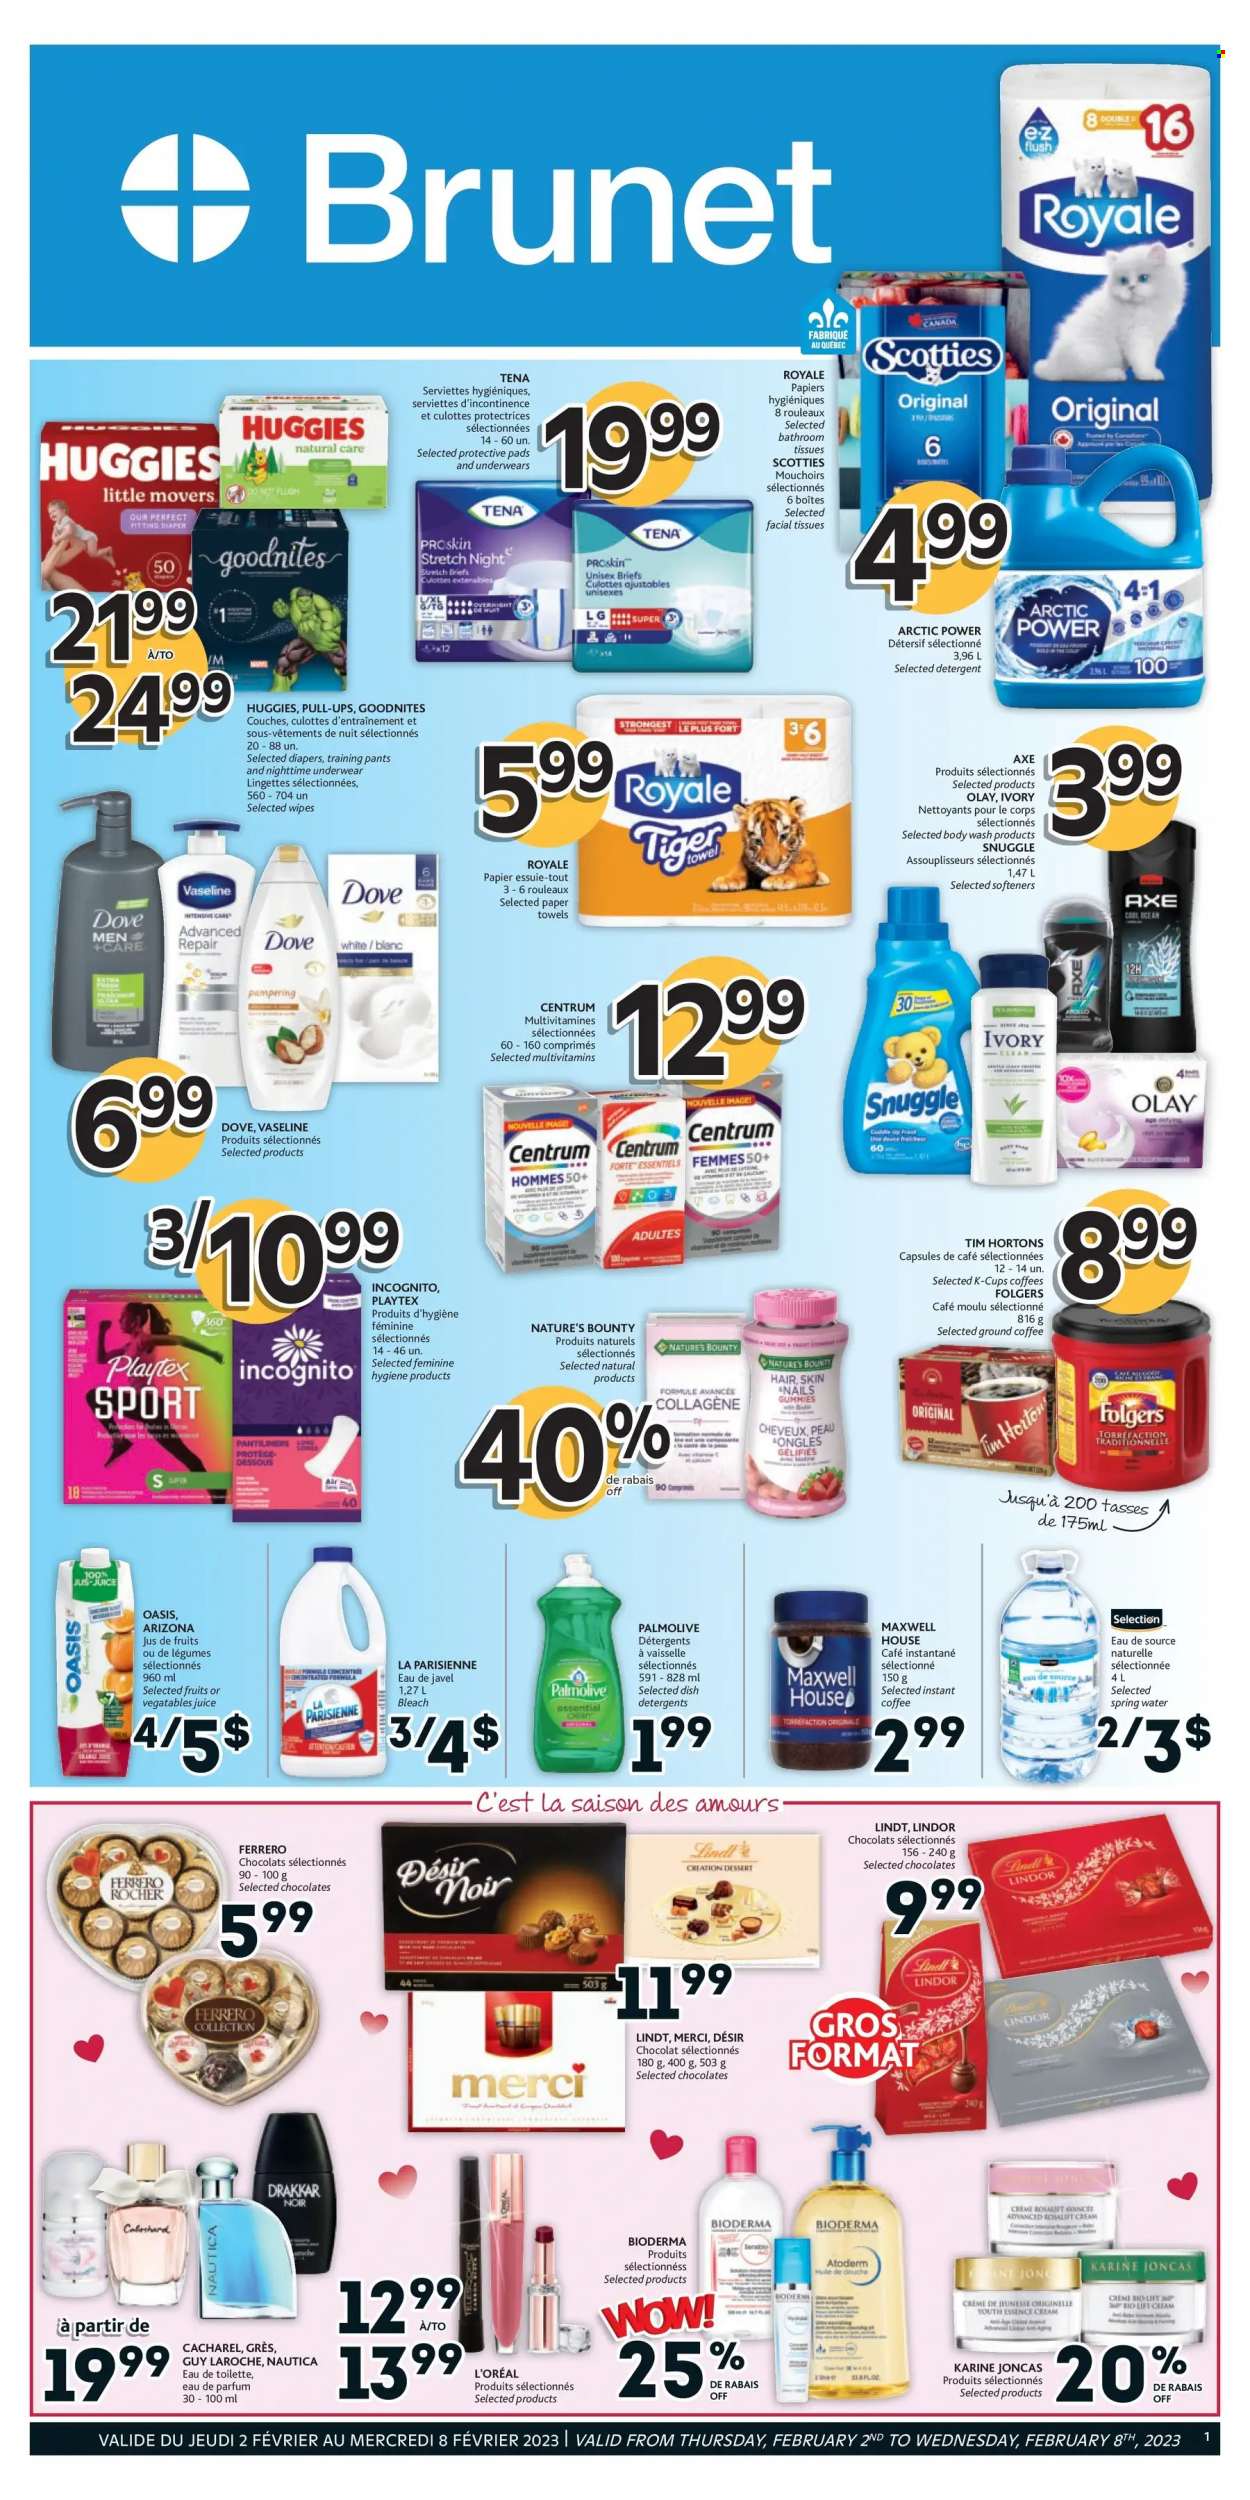 thumbnail - Brunet Flyer - February 02, 2023 - February 08, 2023 - Sales products - Dove, chocolate, Merci, juice, AriZona, spring water, coffee, Maxwell House, instant coffee, Folgers, ground coffee, coffee capsules, K-Cups, wipes, pants, nappies, baby pants, toilet paper, tissues, kitchen towels, paper towels, bleach, Snuggle, body wash, Palmolive, Vaseline, Playtex, pantiliners, facial tissues, L’Oréal, Olay, eau de parfum, Axe, multivitamin, Nature's Bounty, Centrum, detergent, eau de toilette, Huggies, Lindt, Lindor, Ferrero Rocher. Page 10.